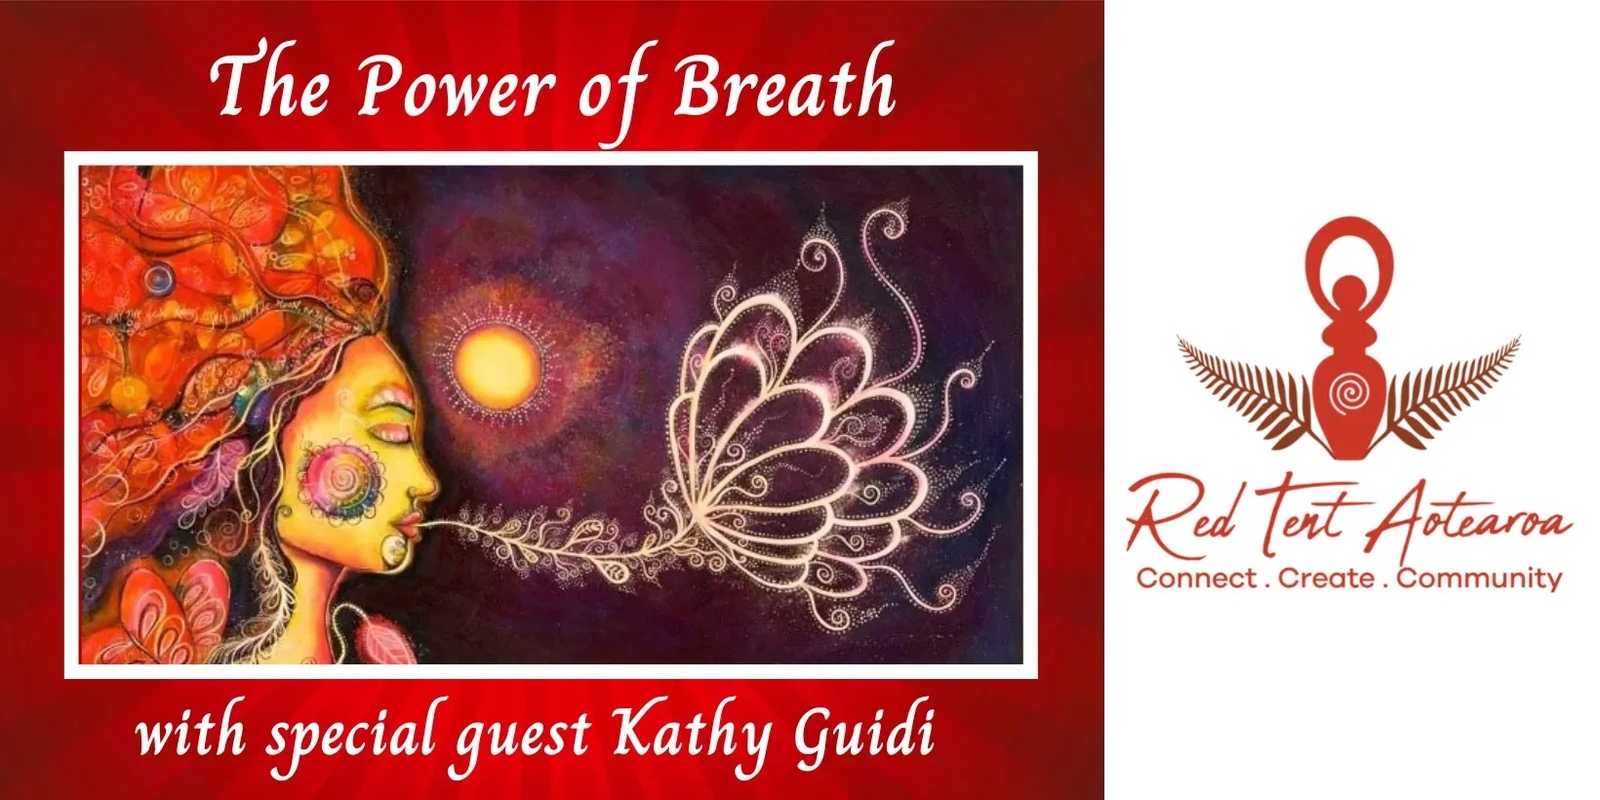 Banner image for The Power of Breath- Red Tent Aotearoa